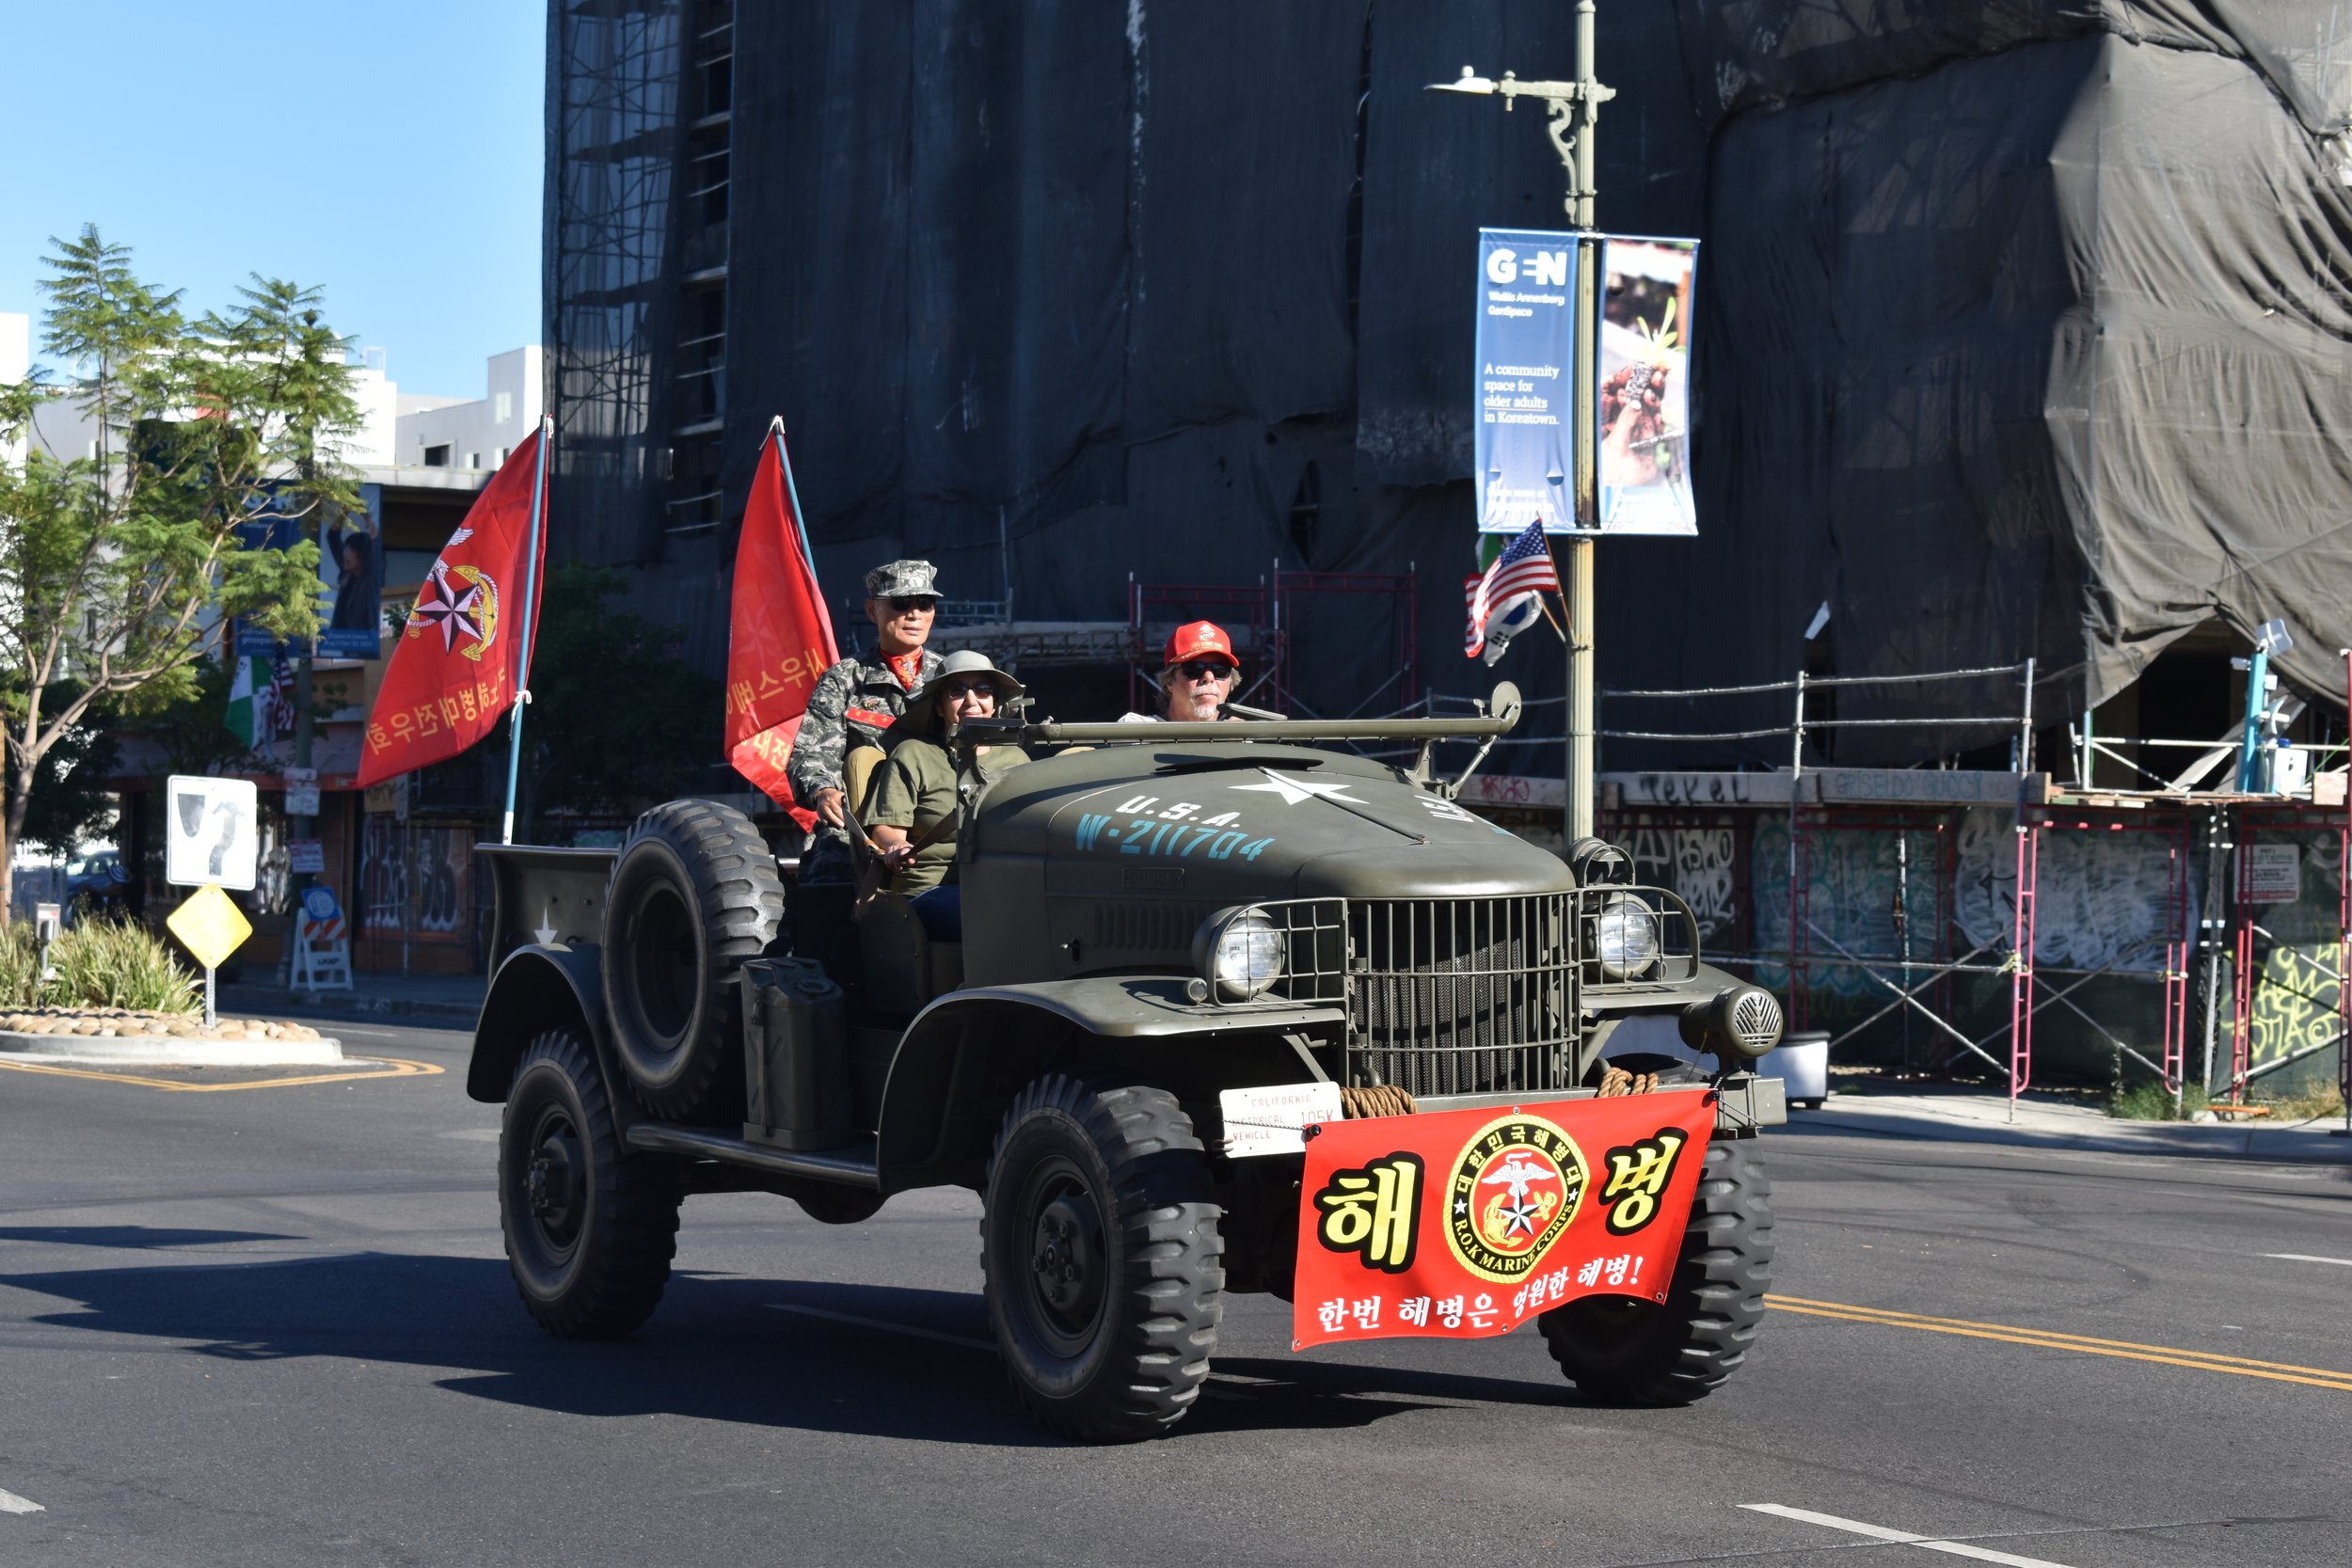  Marine corps vehicle cruises down West. Olympic Boulevard. on Saturday, Sept, 24. in Koreatown Los Angeles, Calif. for the 49th annual Korean Festival parade. (Guadalupe Perez | The Corsair) 